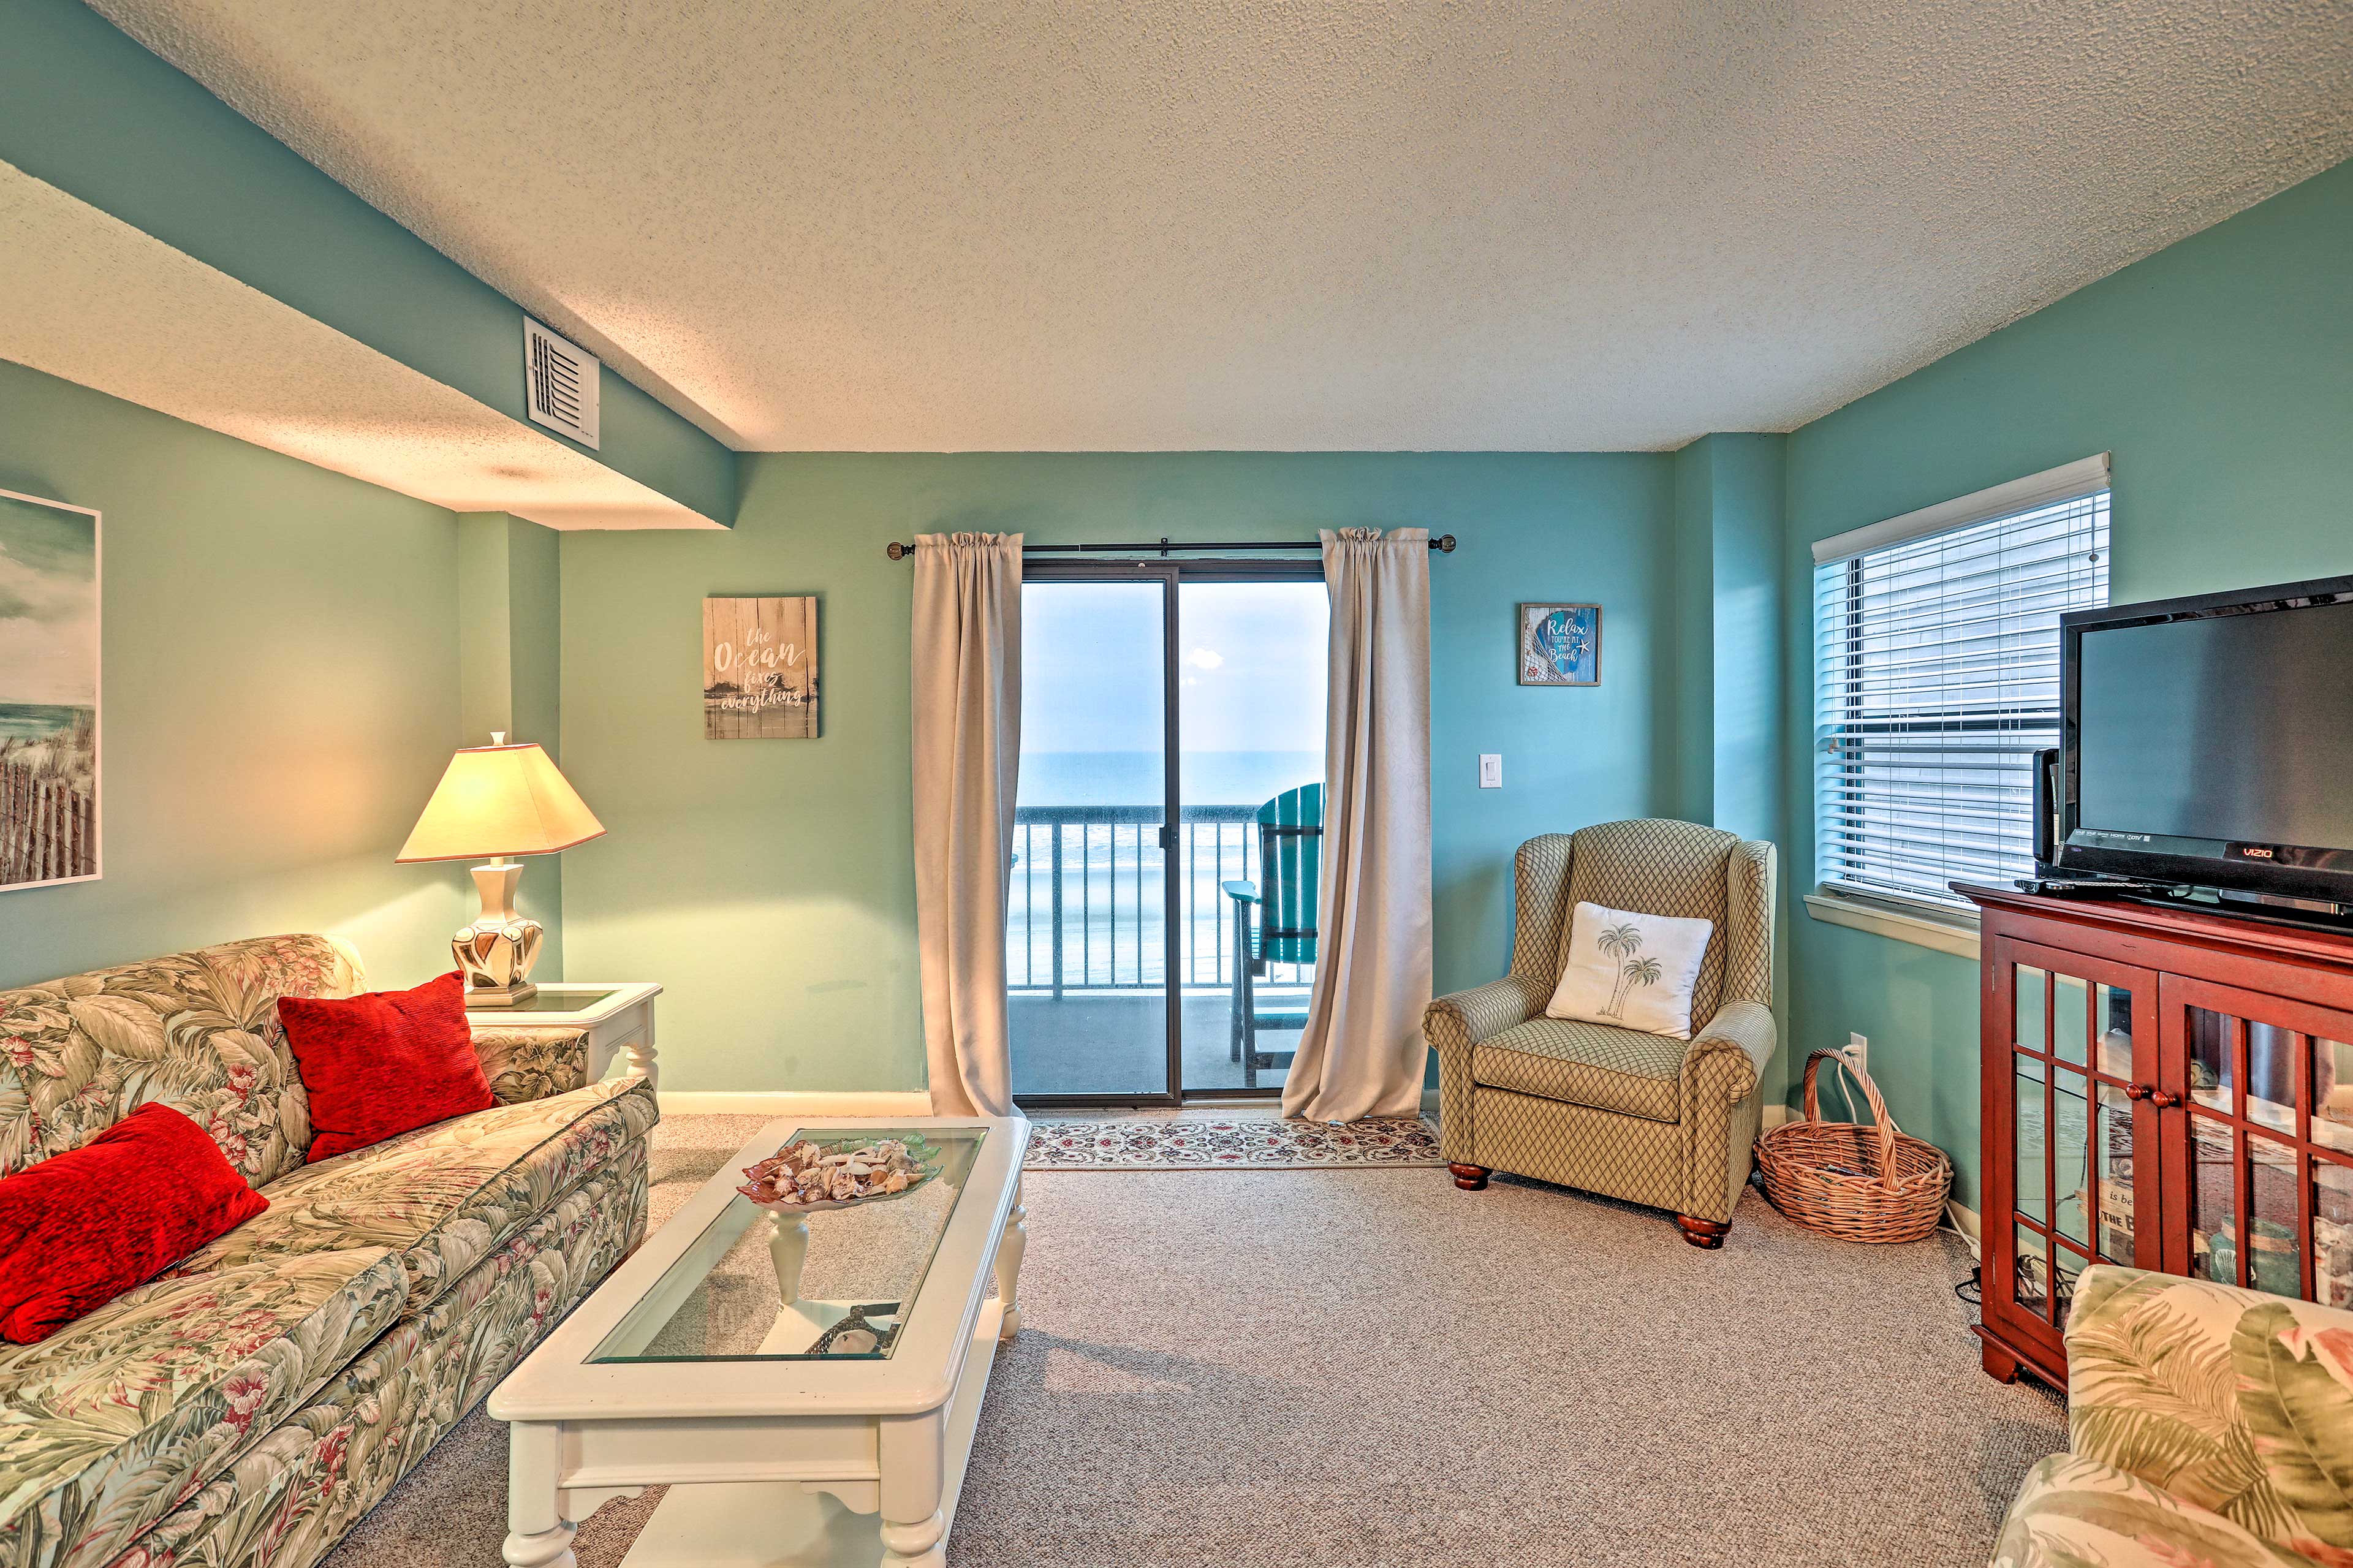 Relax inside the updated and charming spaces of this vacation rental.